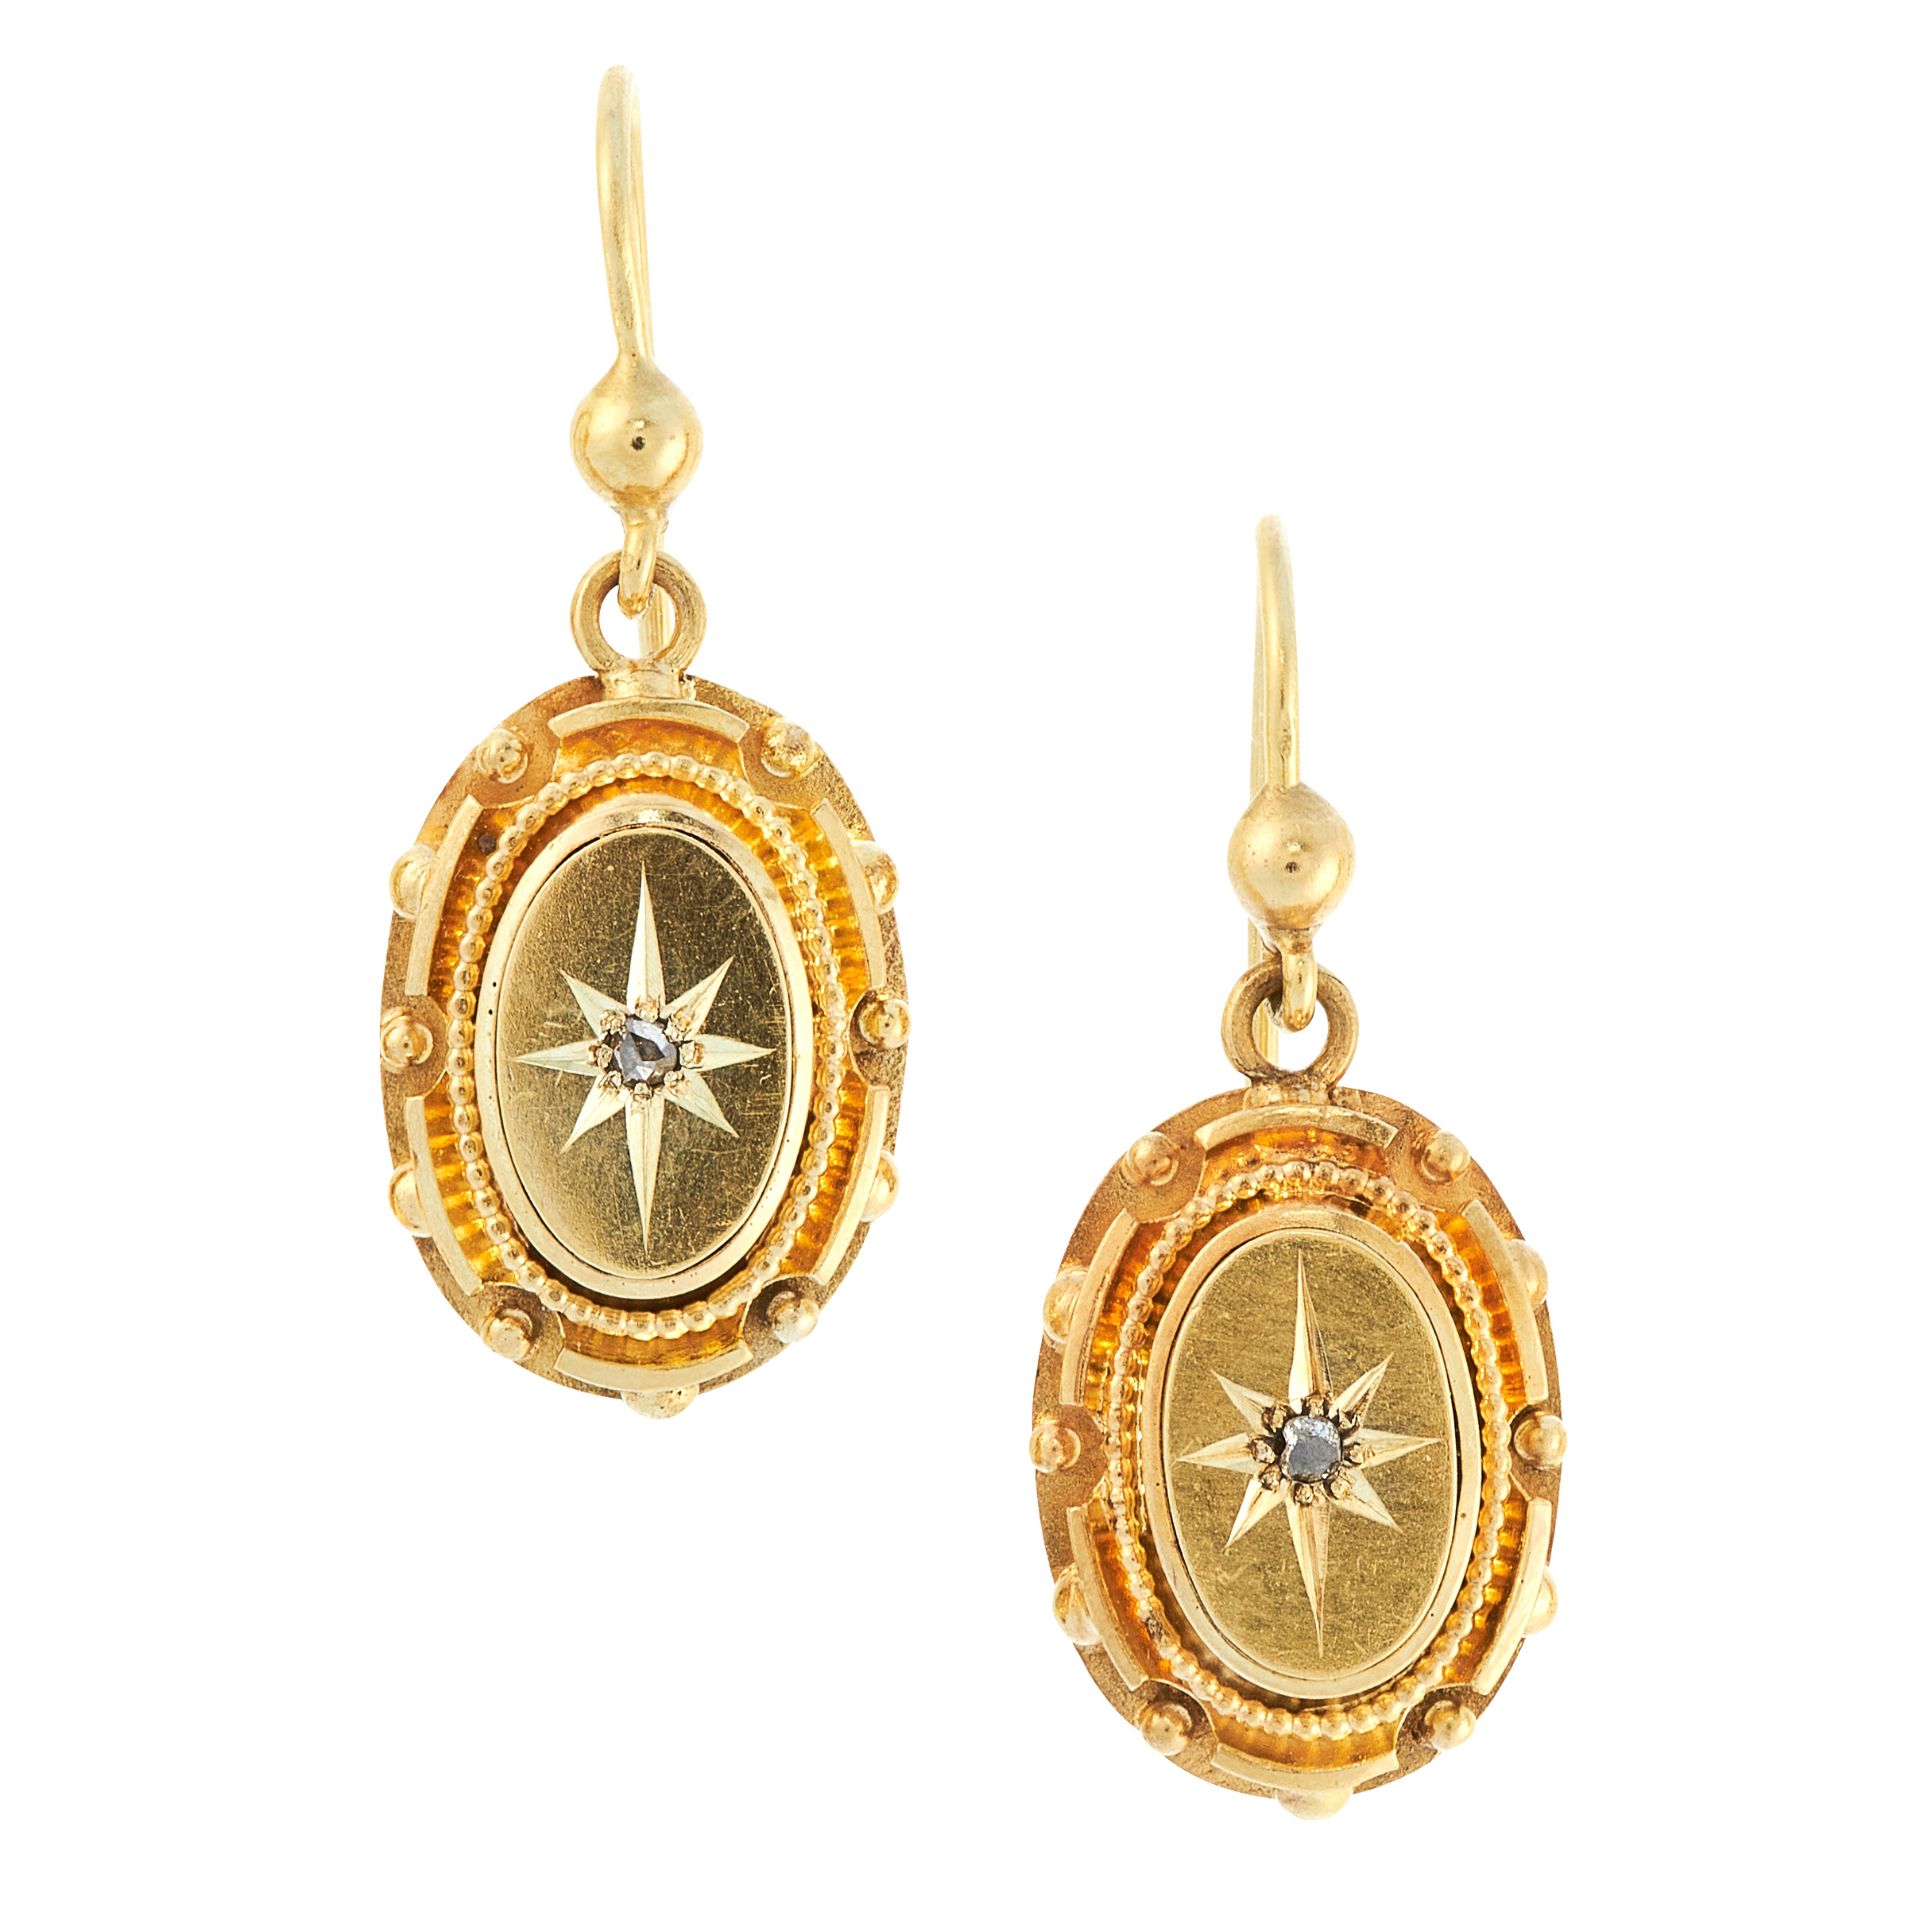 A PAIR OF ANTIQUE DIAMOND EARRINGS, 19TH CENTURY in 15ct yellow gold, the oval bodies set at the